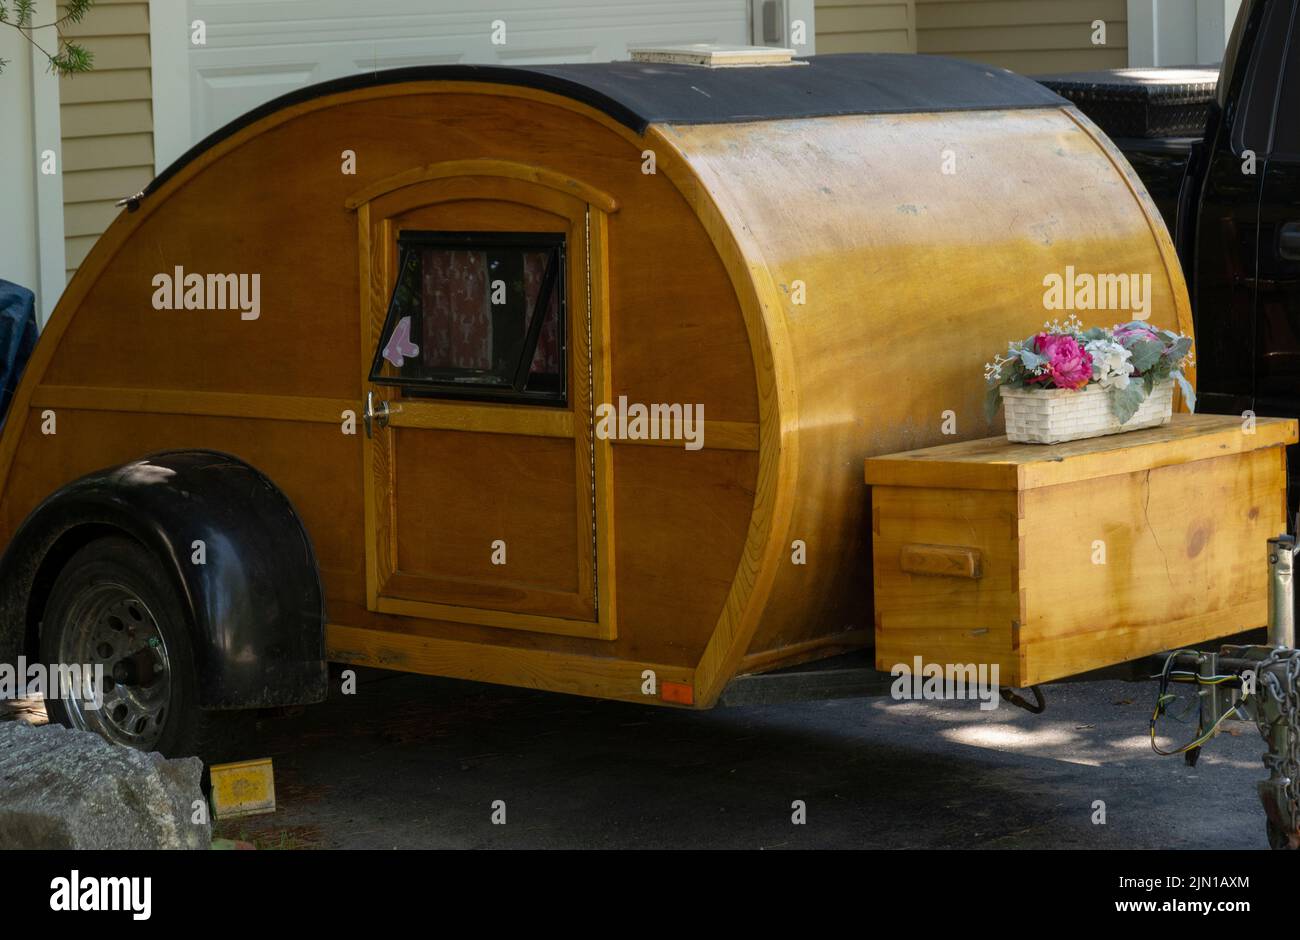 old wooden teardrop trailer in house driveway in Wiscasset Maine Stock Photo